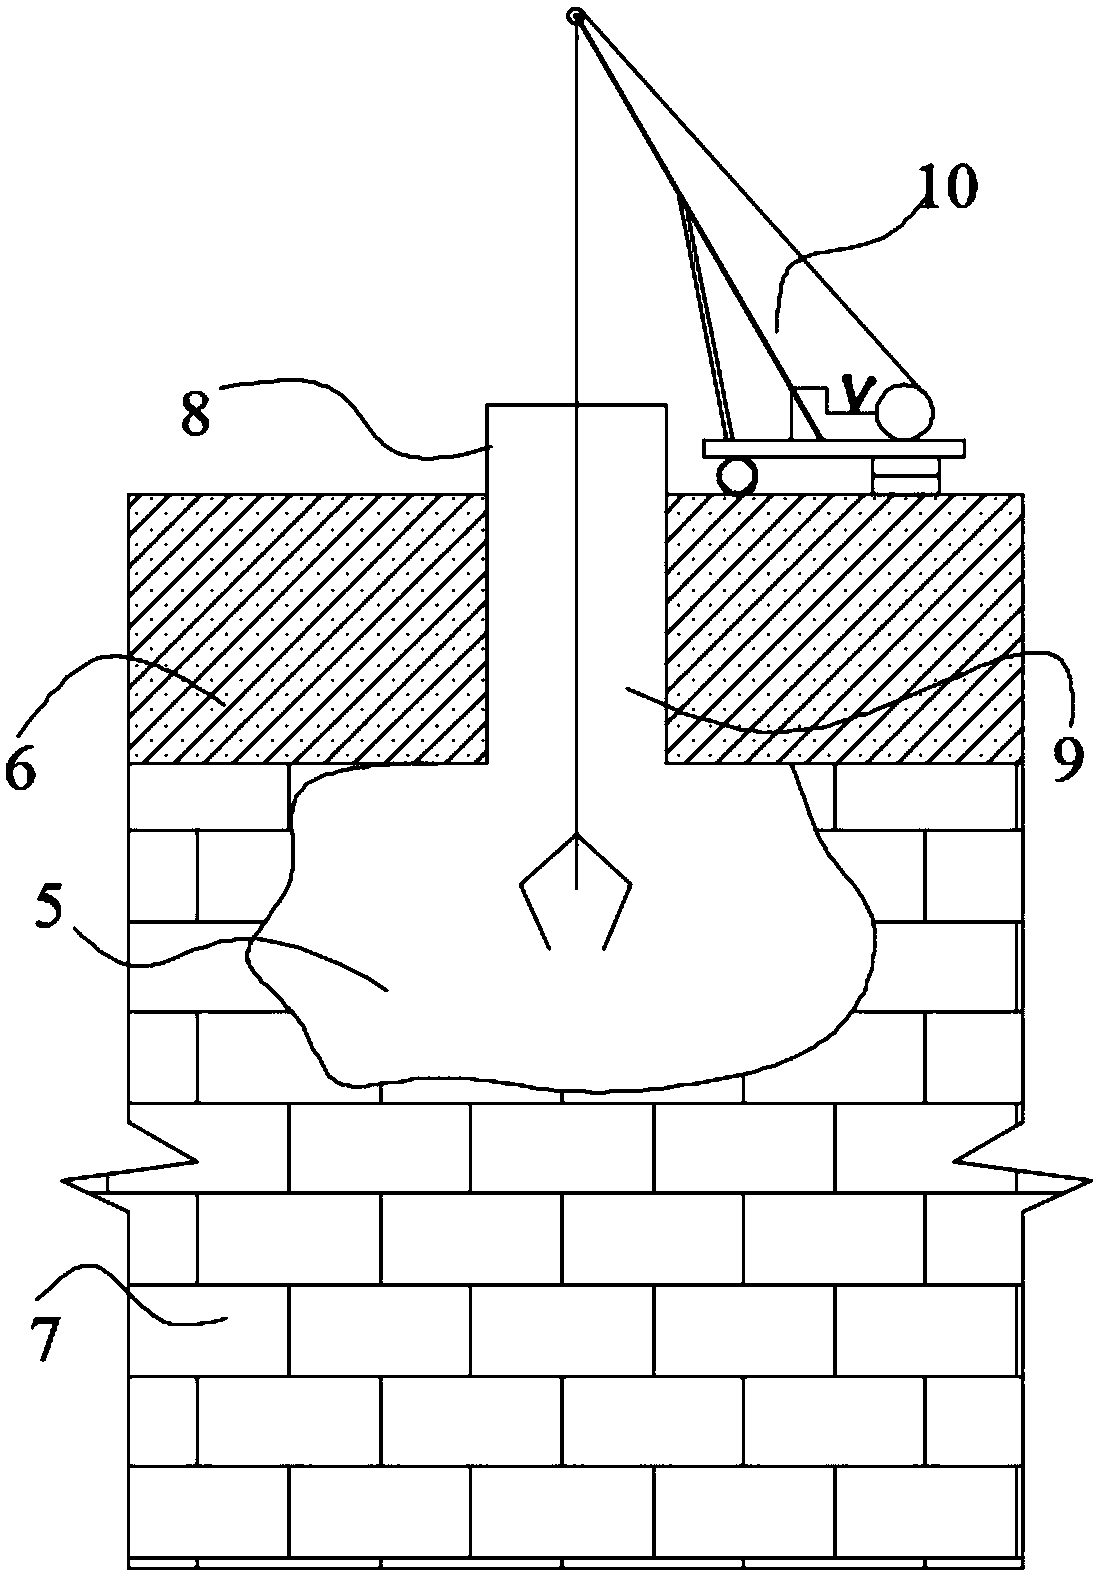 Pile foundation construction method capable of three-dimensional expansion